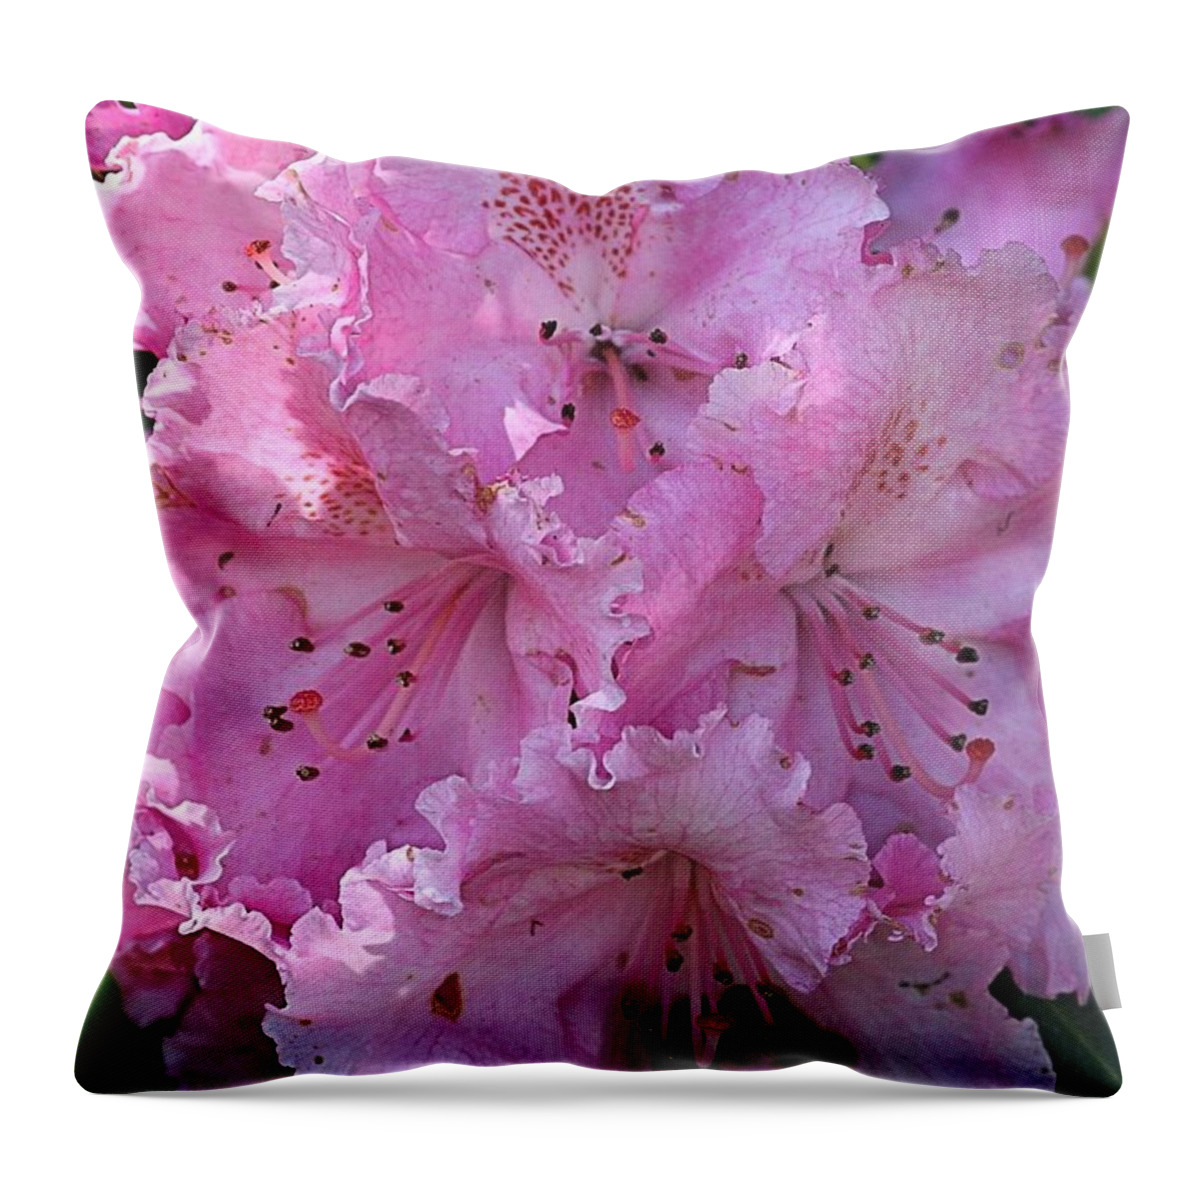 Rhodie Throw Pillow featuring the photograph Pink Rhododendrons by Chriss Pagani